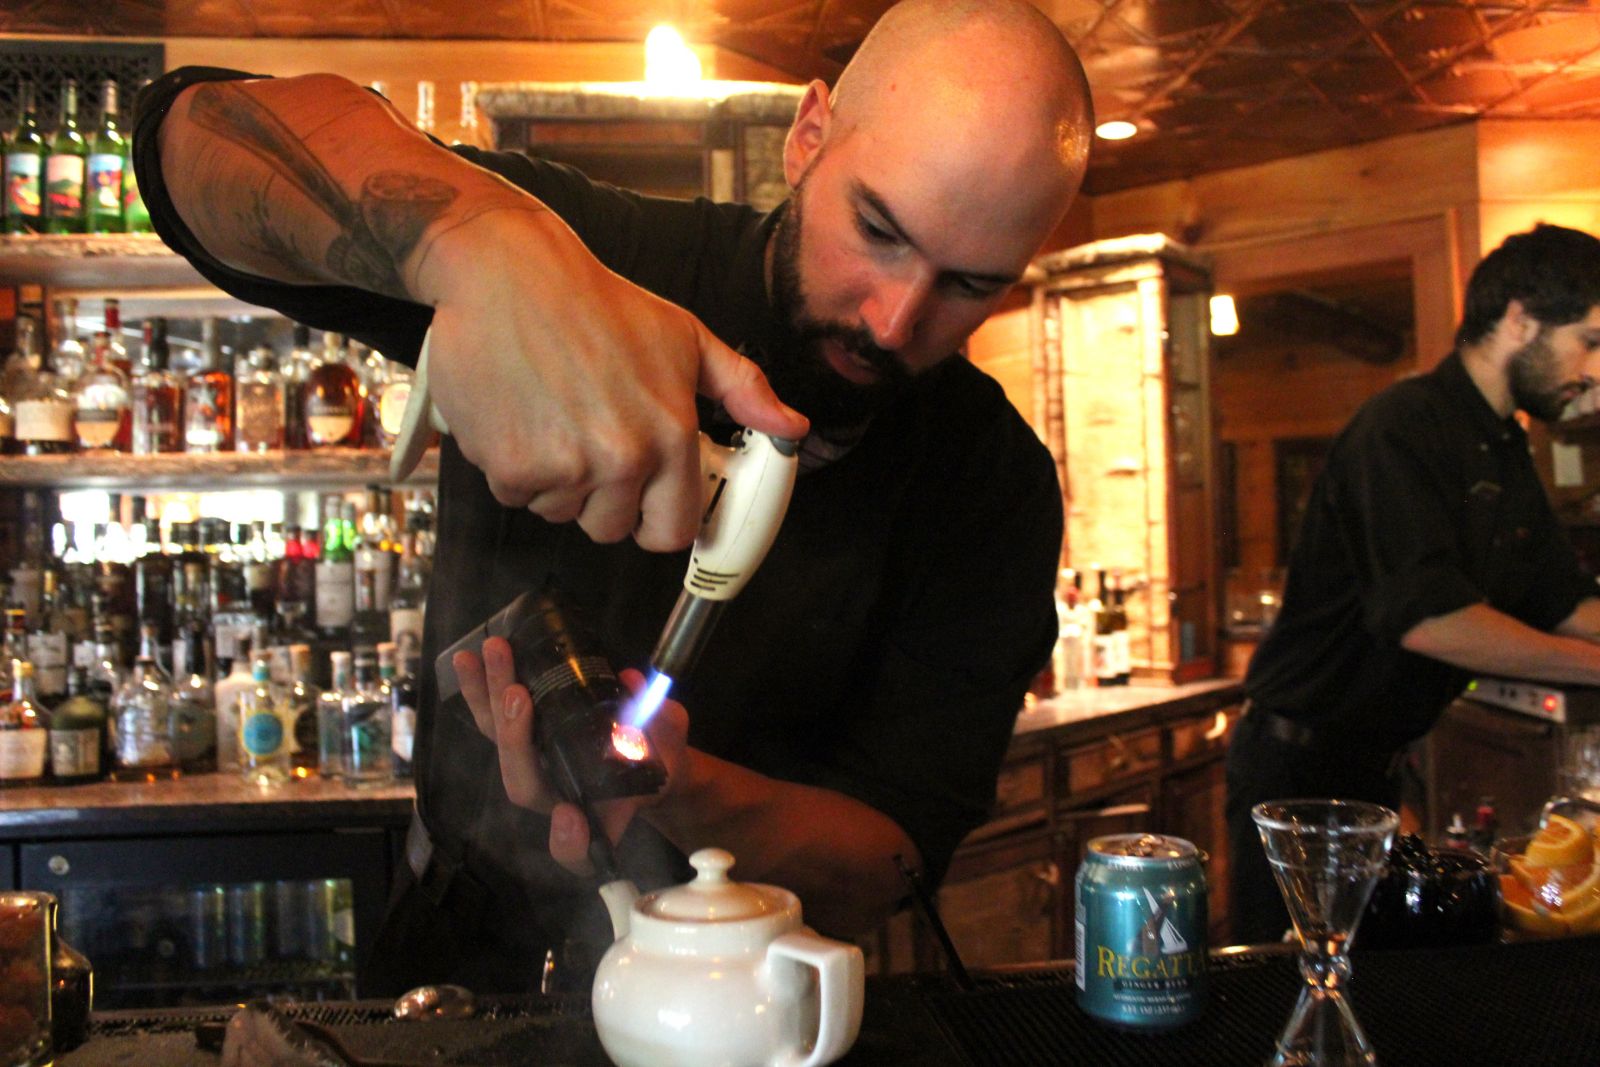 This is how you get smoke into a teapot.